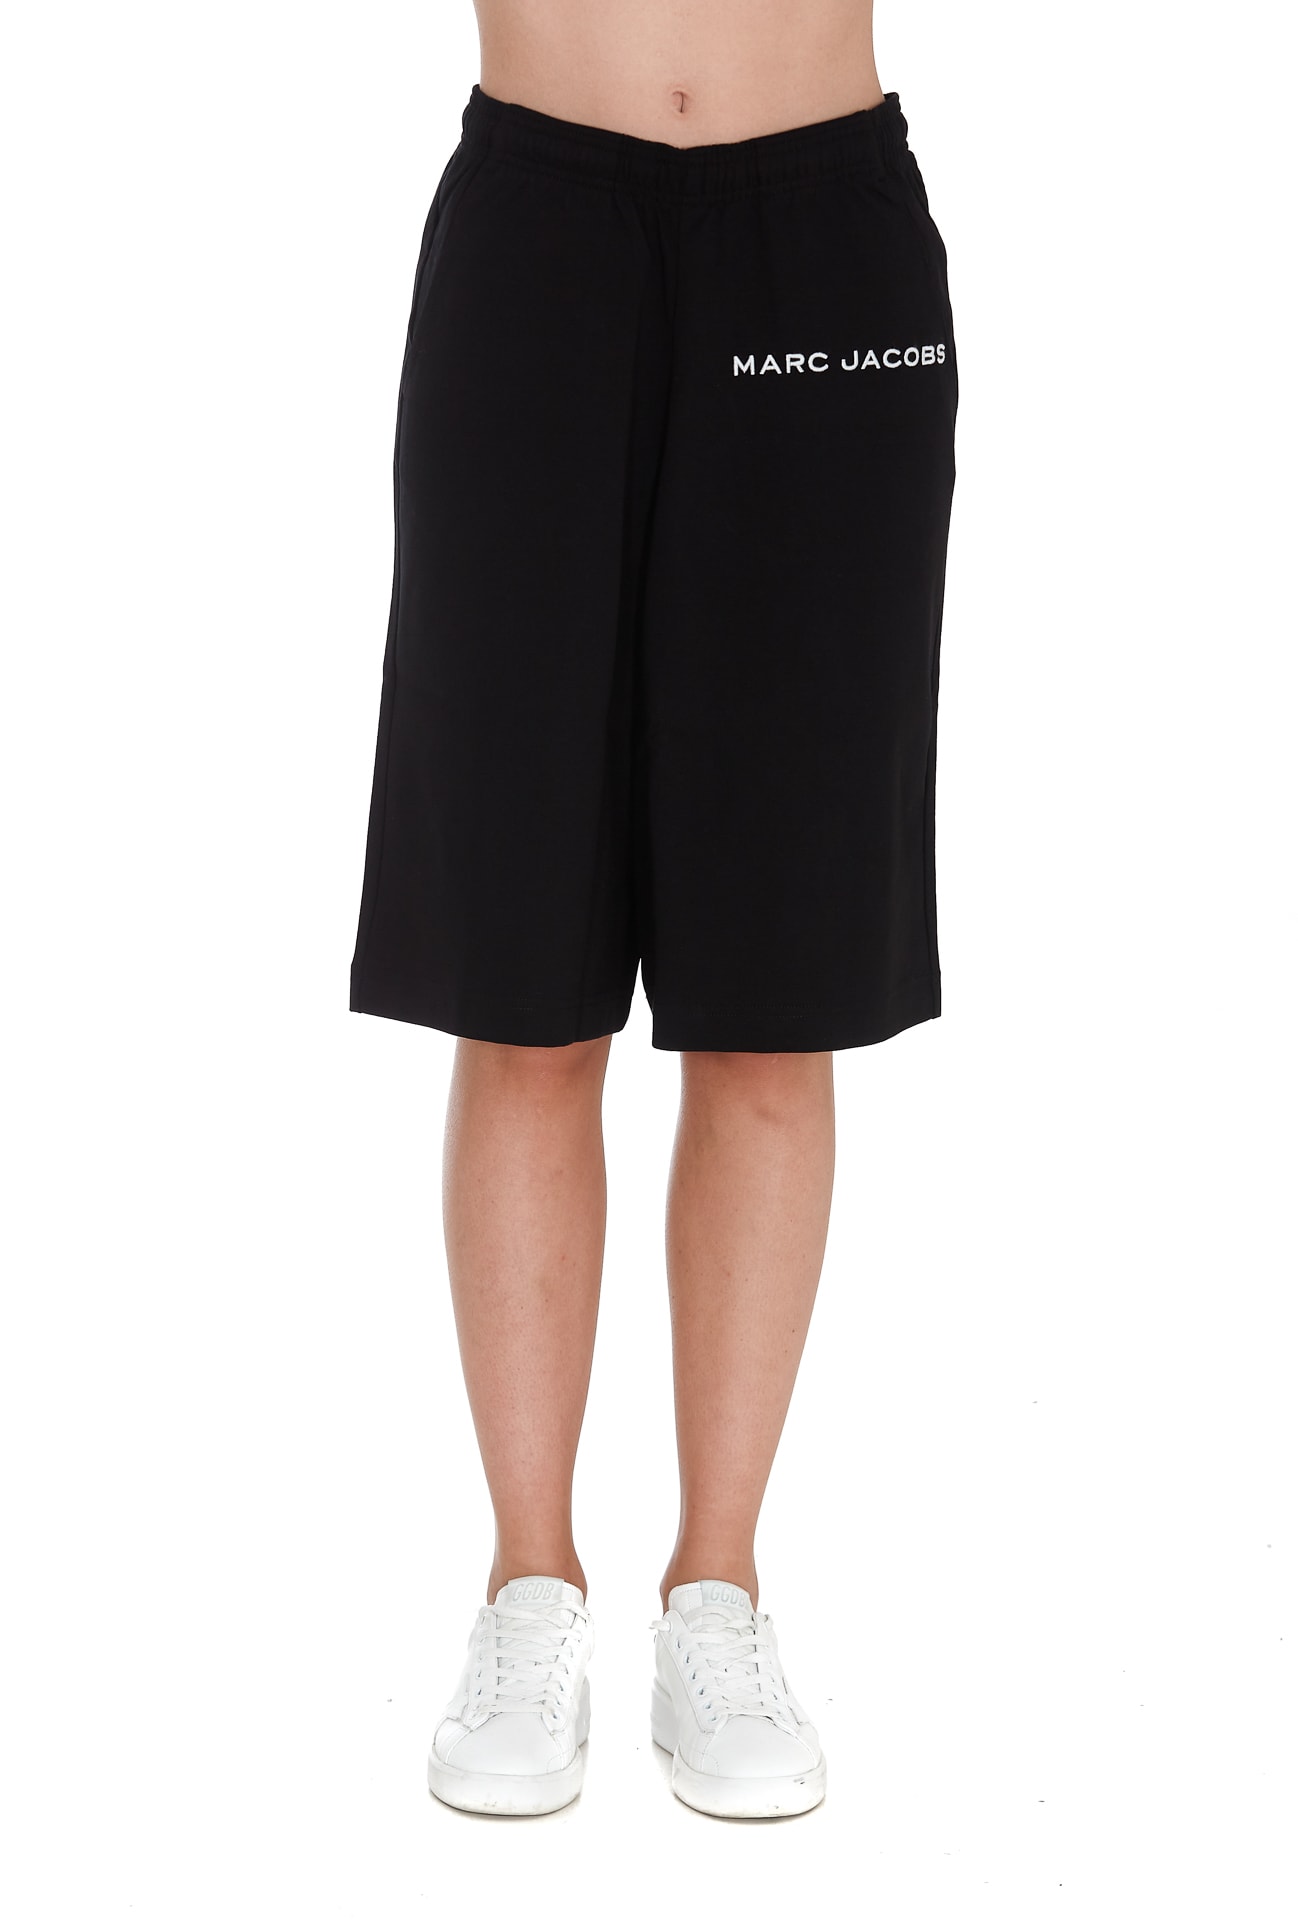 Marc Jacobs The T-shorts